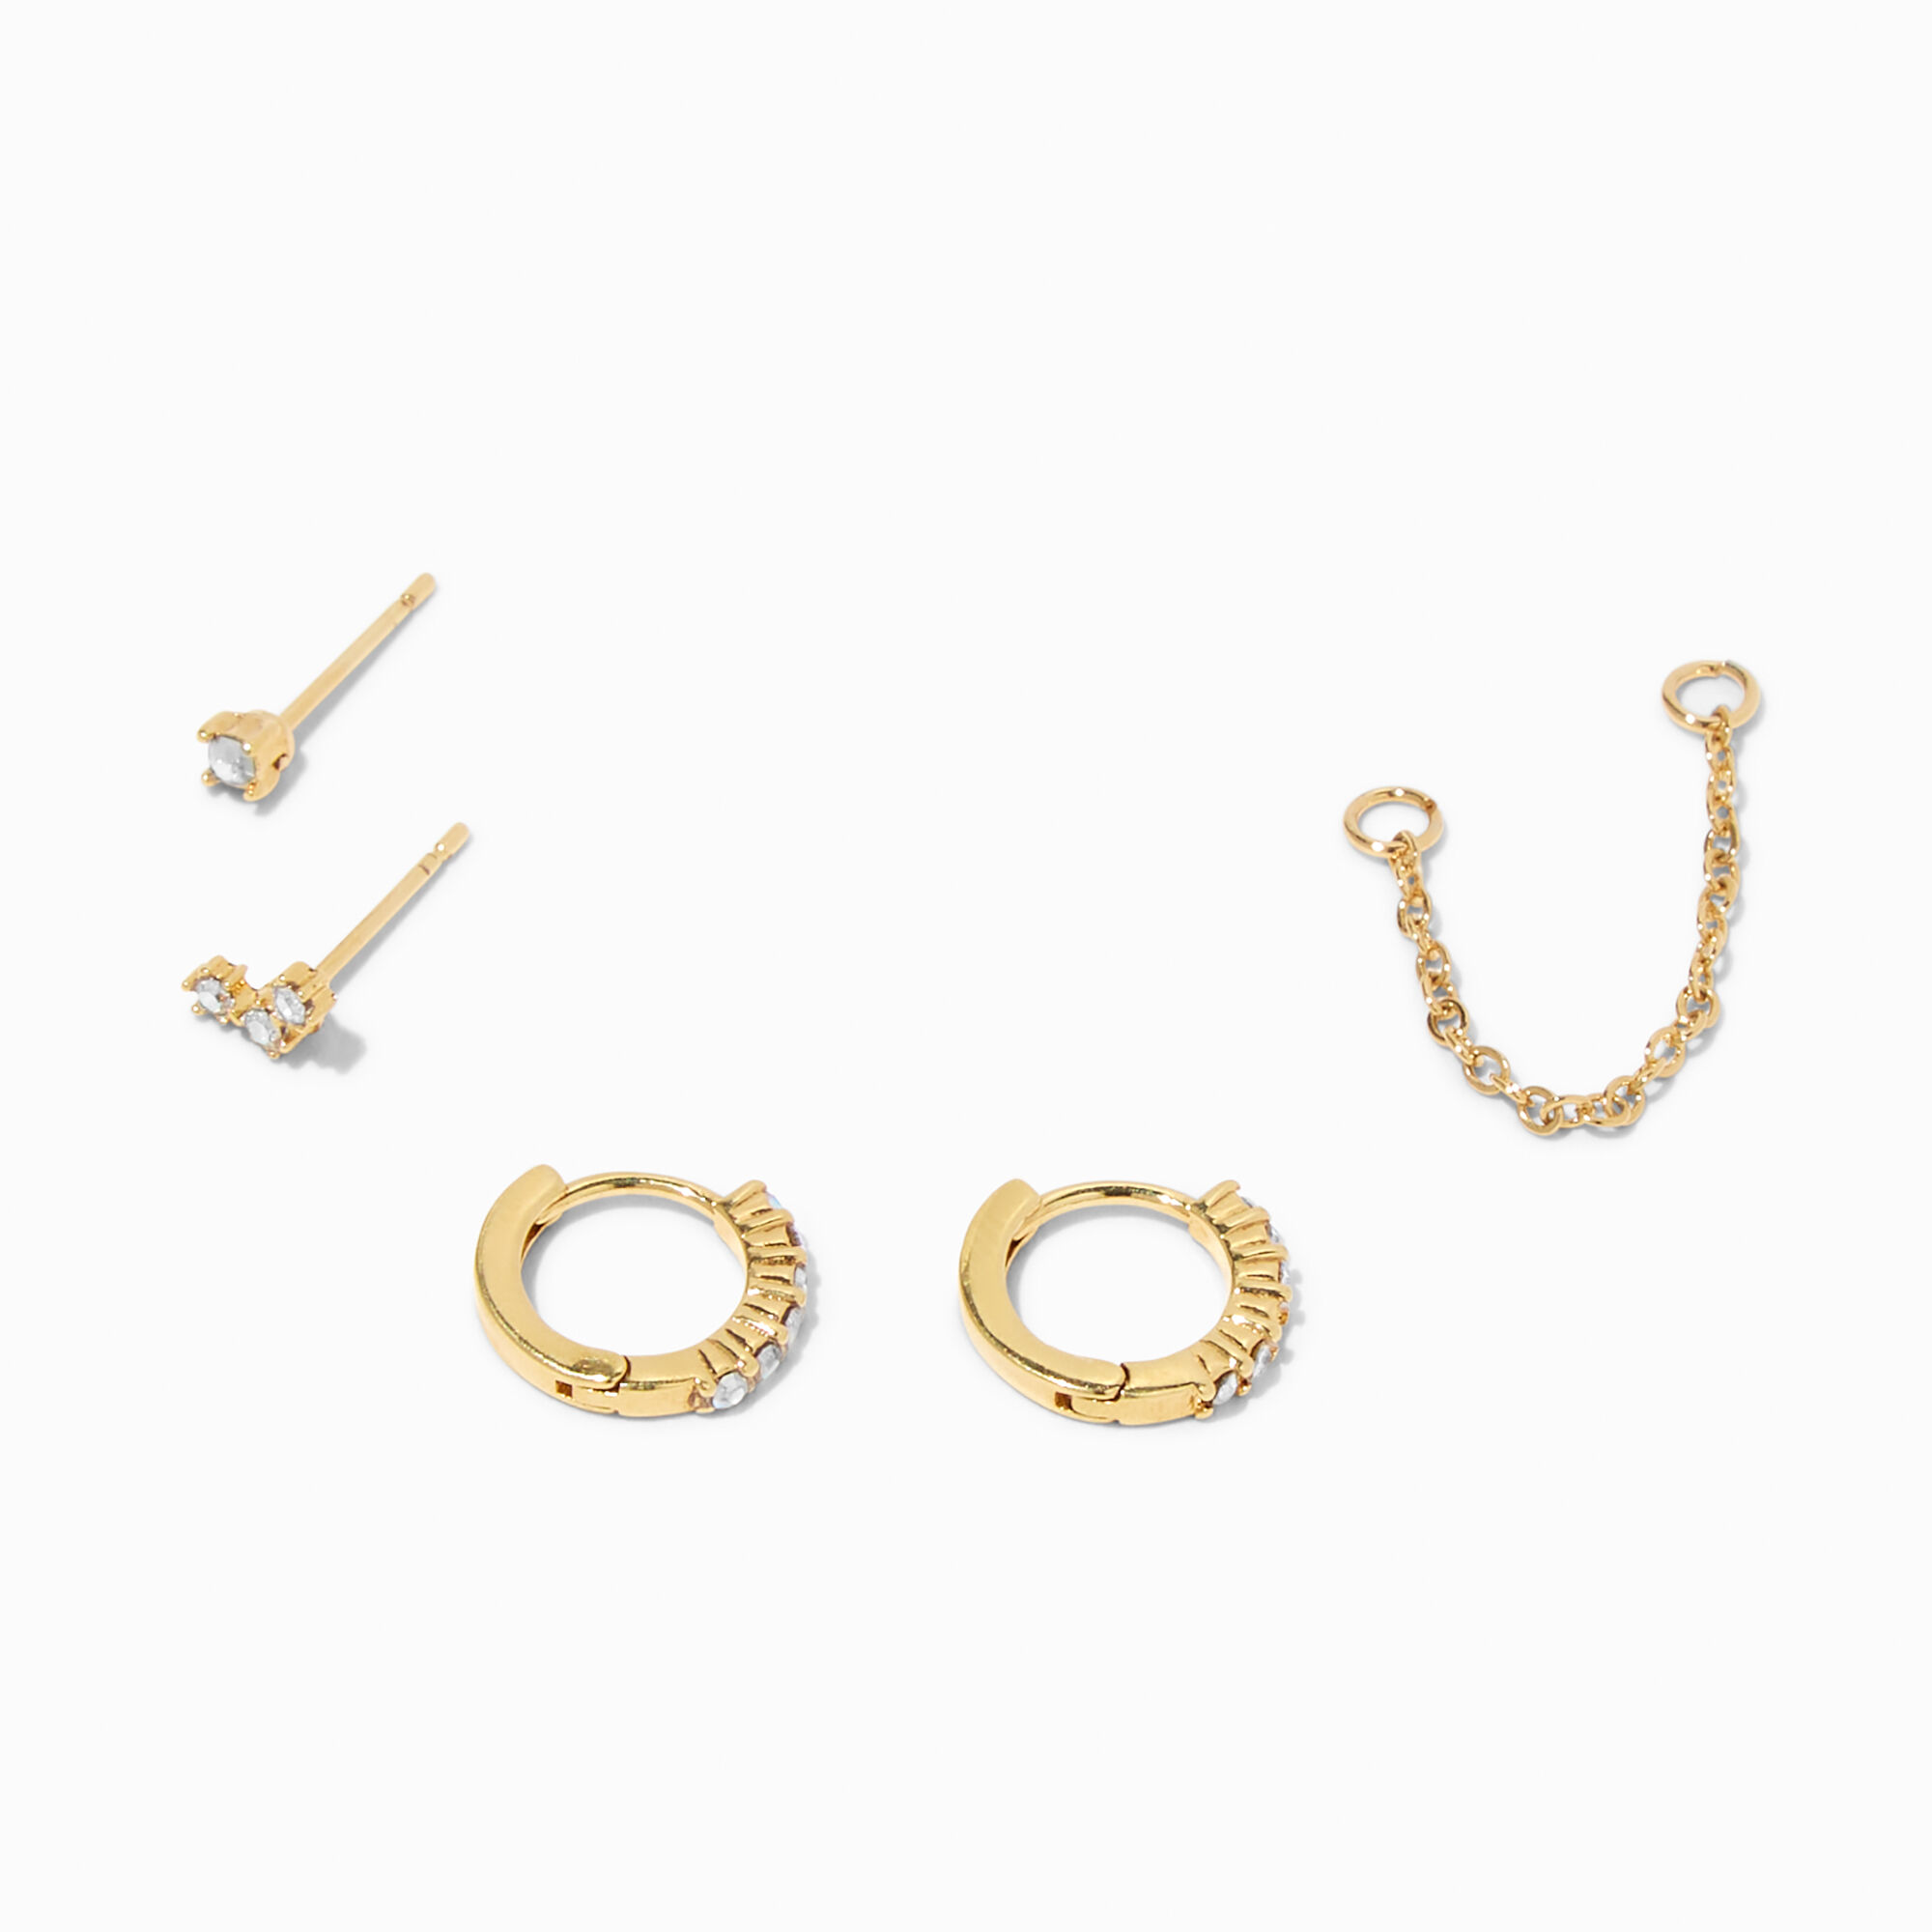 View C Luxe By Claires 18K Gold Plated Iridescent Hoop Connector Chain Star Stud Earring Set 5 Pack Yellow information